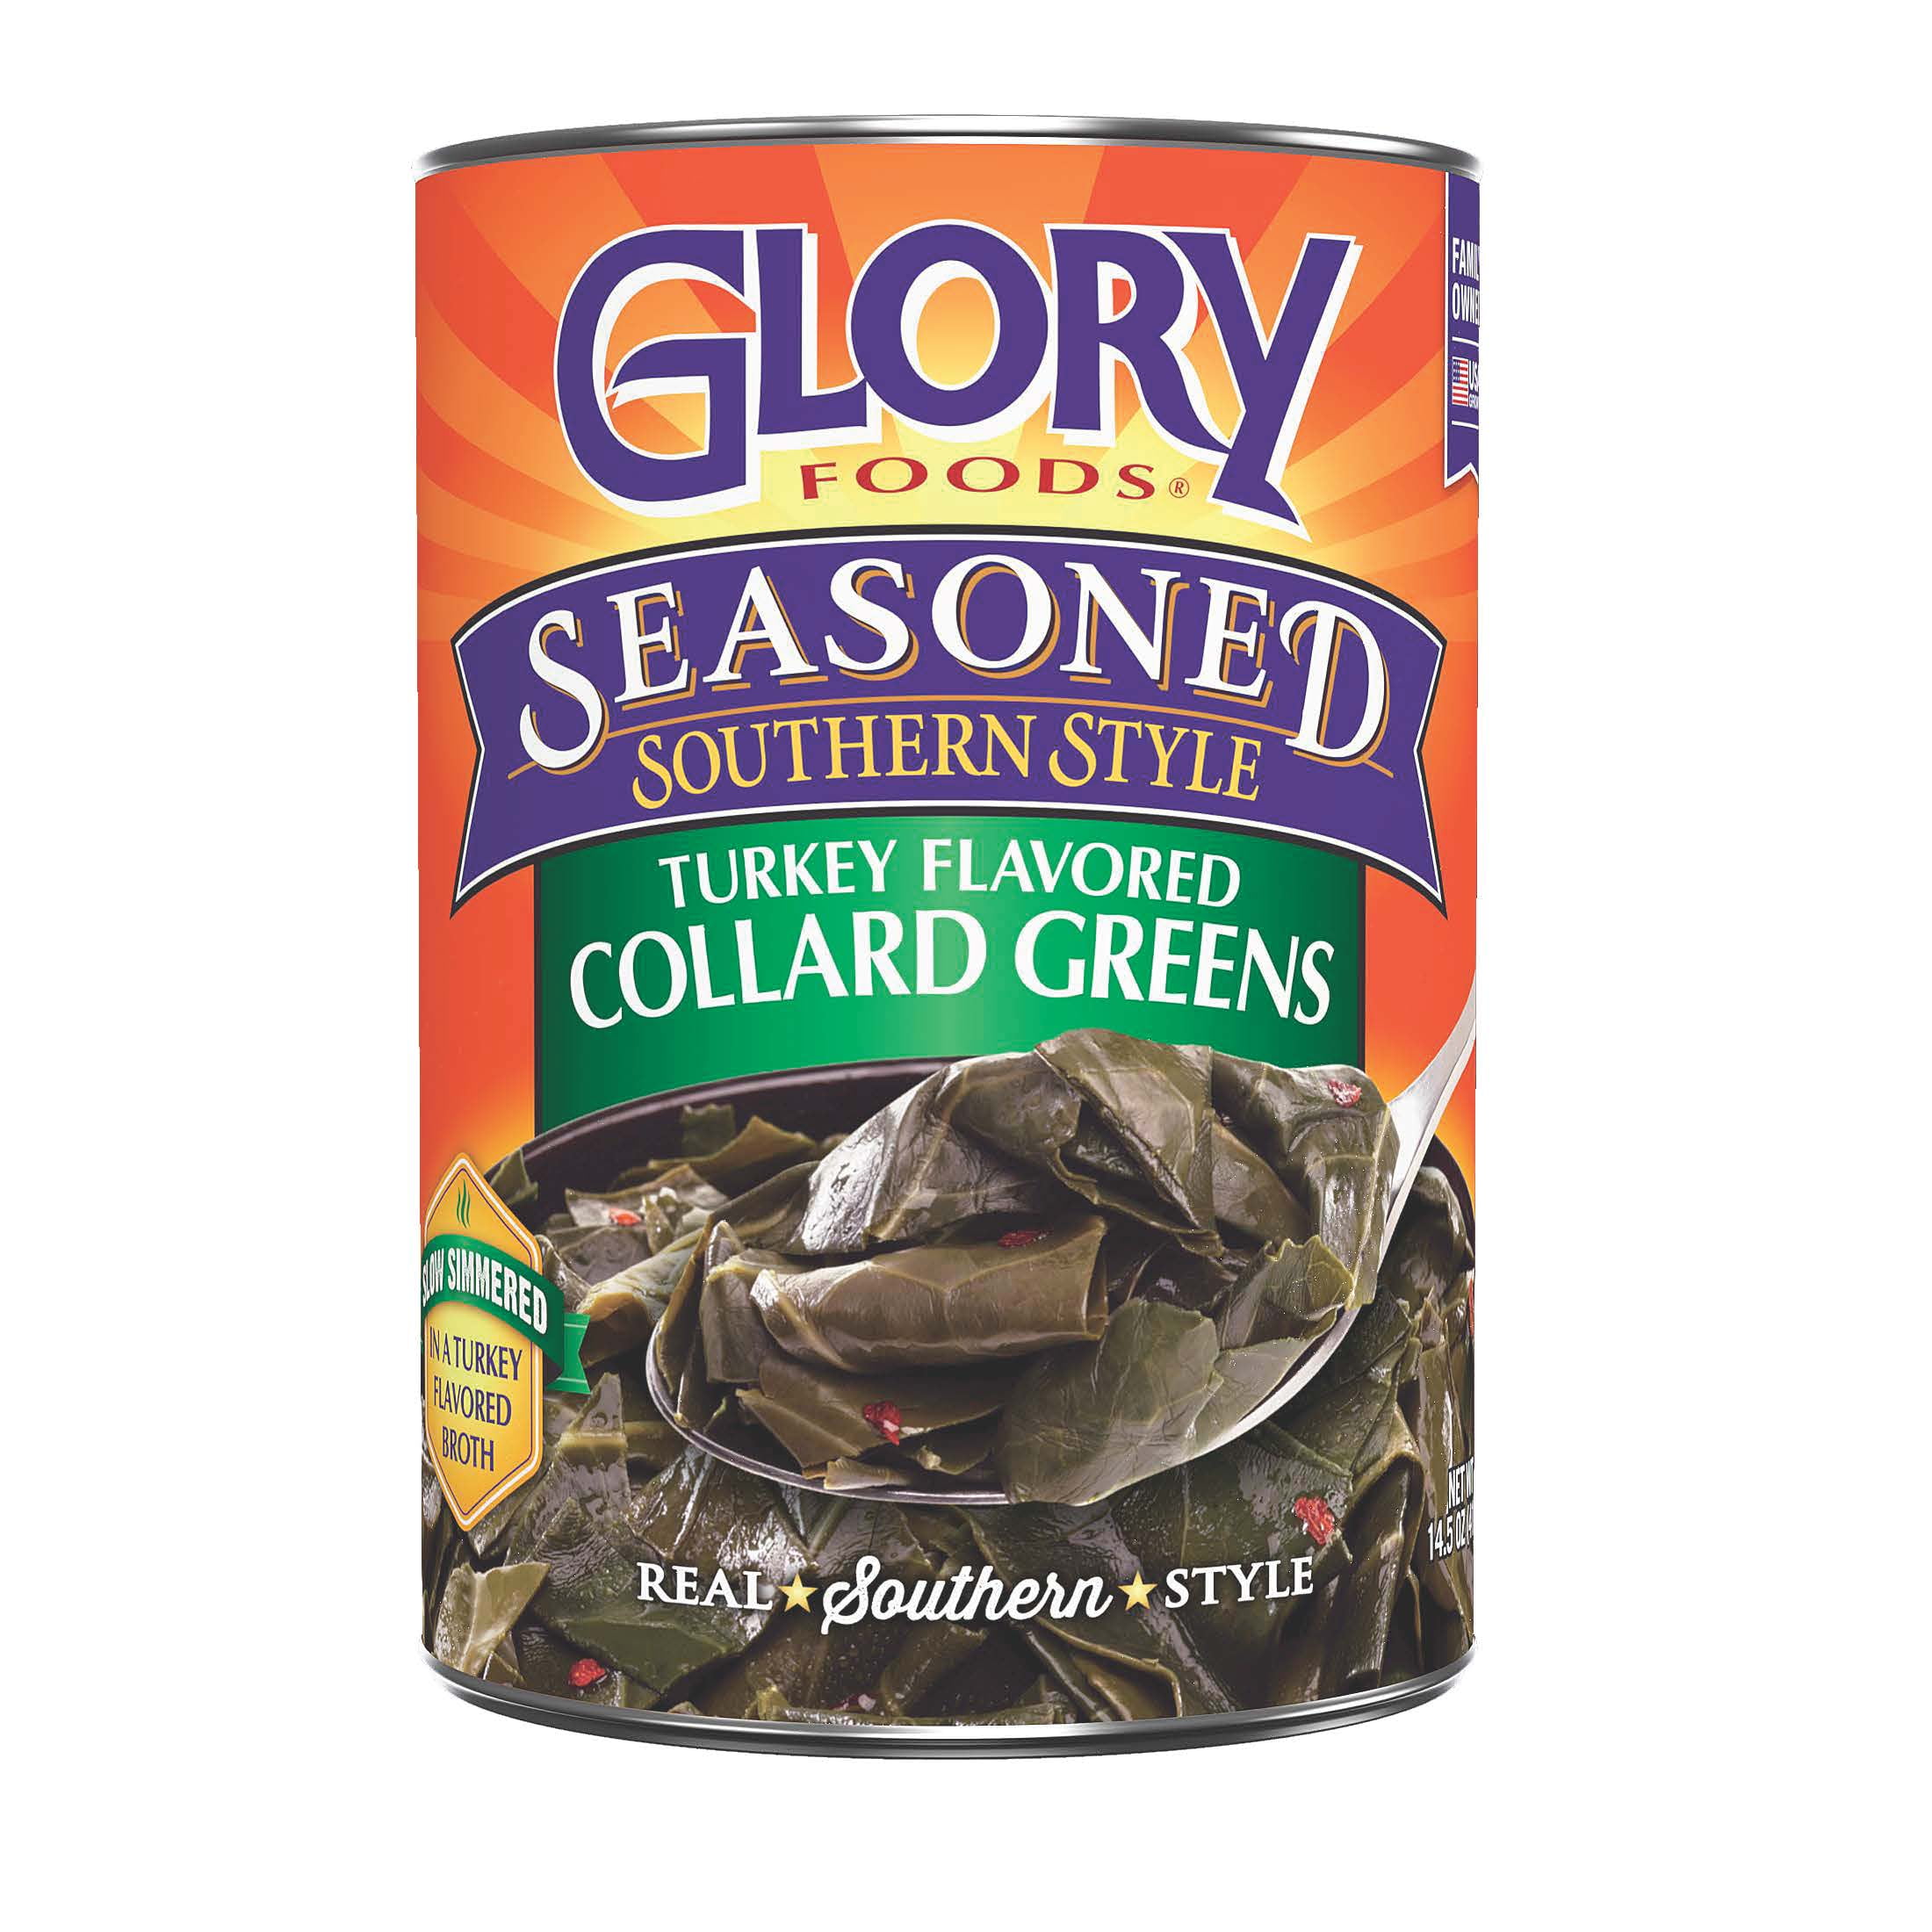 Glory Foods Turkey Flavored Collard Greens, Canned Vegetables, 14.5 oz